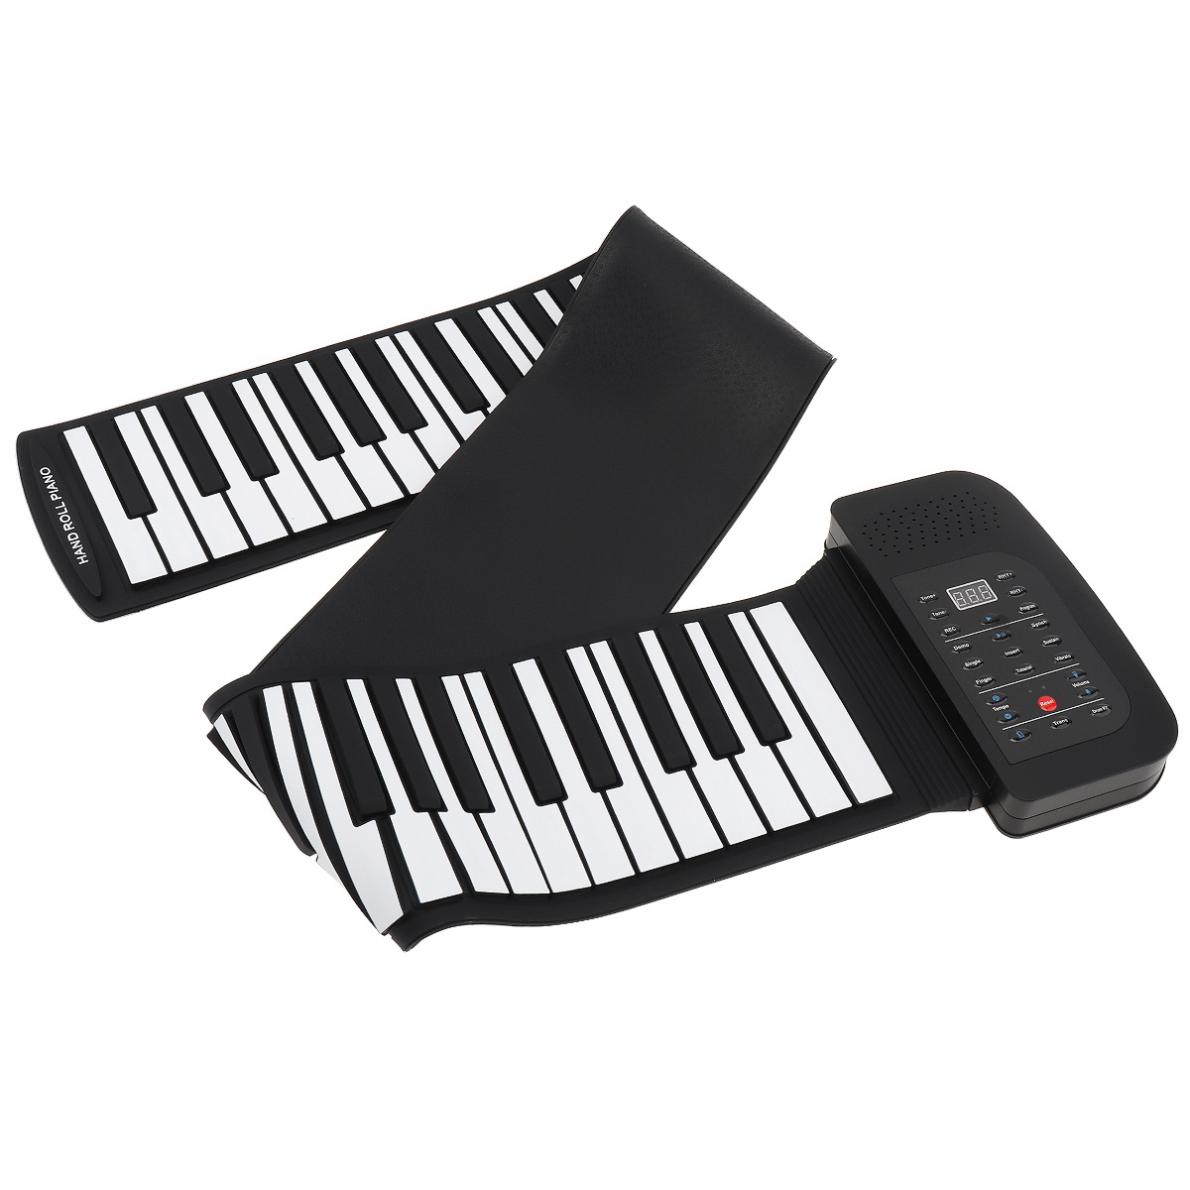 88 Keys Roll Up Electronic Piano Rechargeable Silicone Flexible Keyboard Organ Built-in Speaker Support MIDI Bluetooth hot